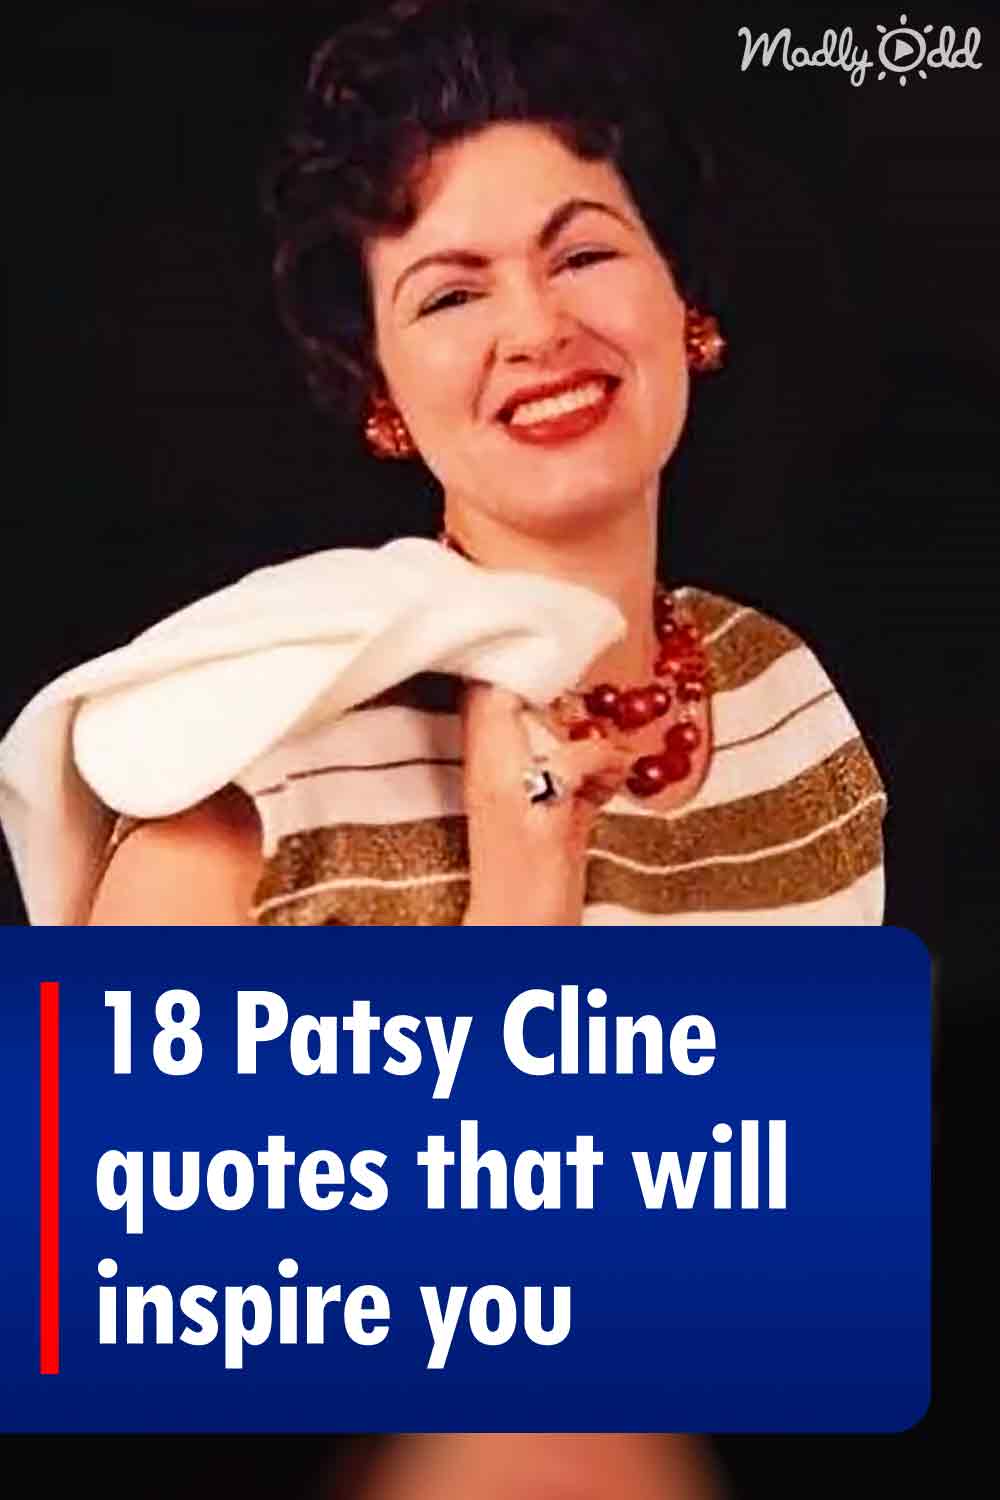 18 Patsy Cline quotes that will inspire you